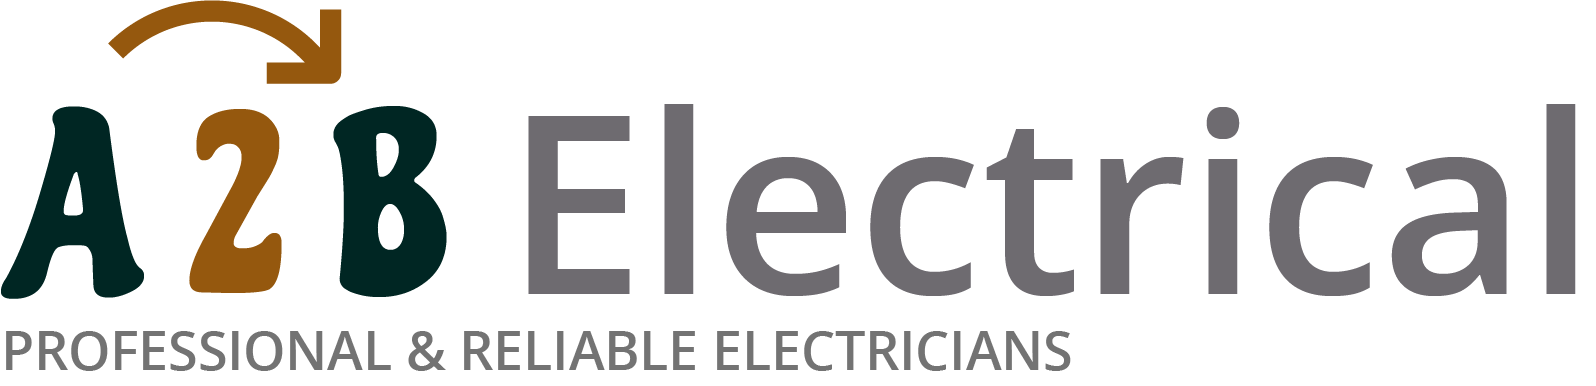 If you have electrical wiring problems in Greenford, we can provide an electrician to have a look for you. 